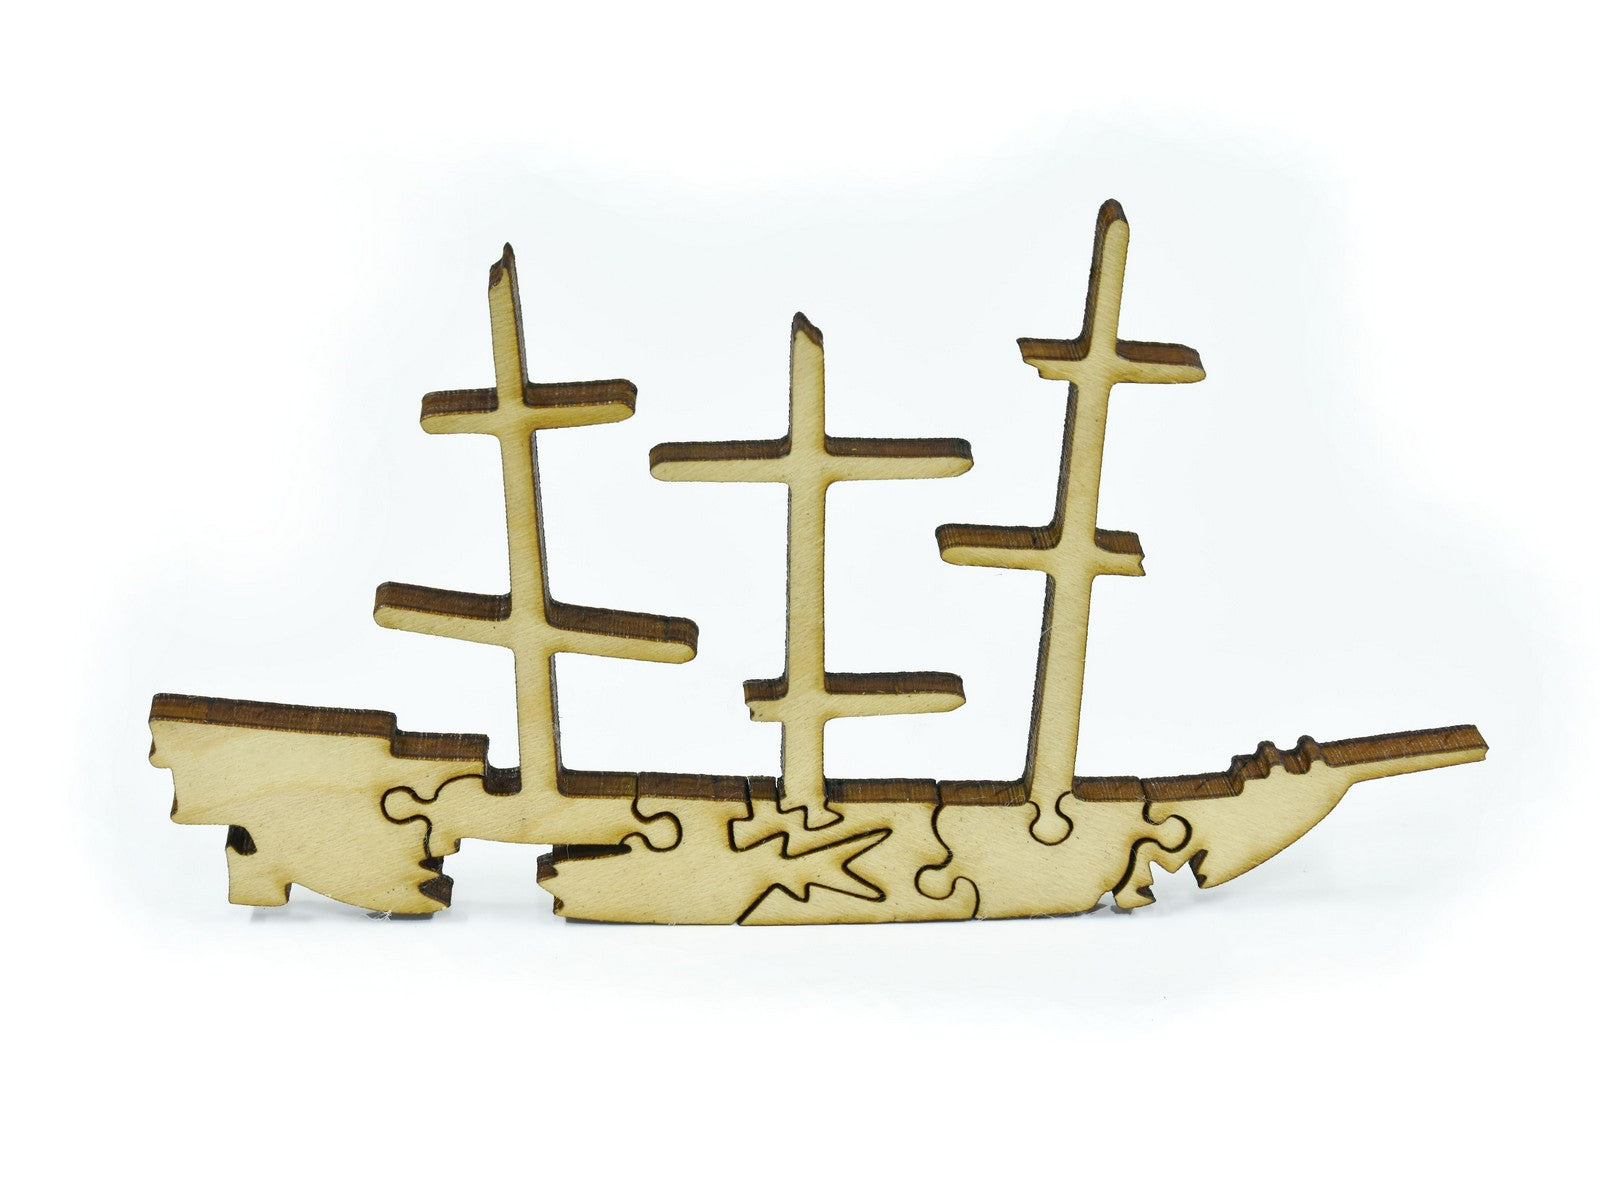 A closeup of pieces in the shape of a shipwreck.